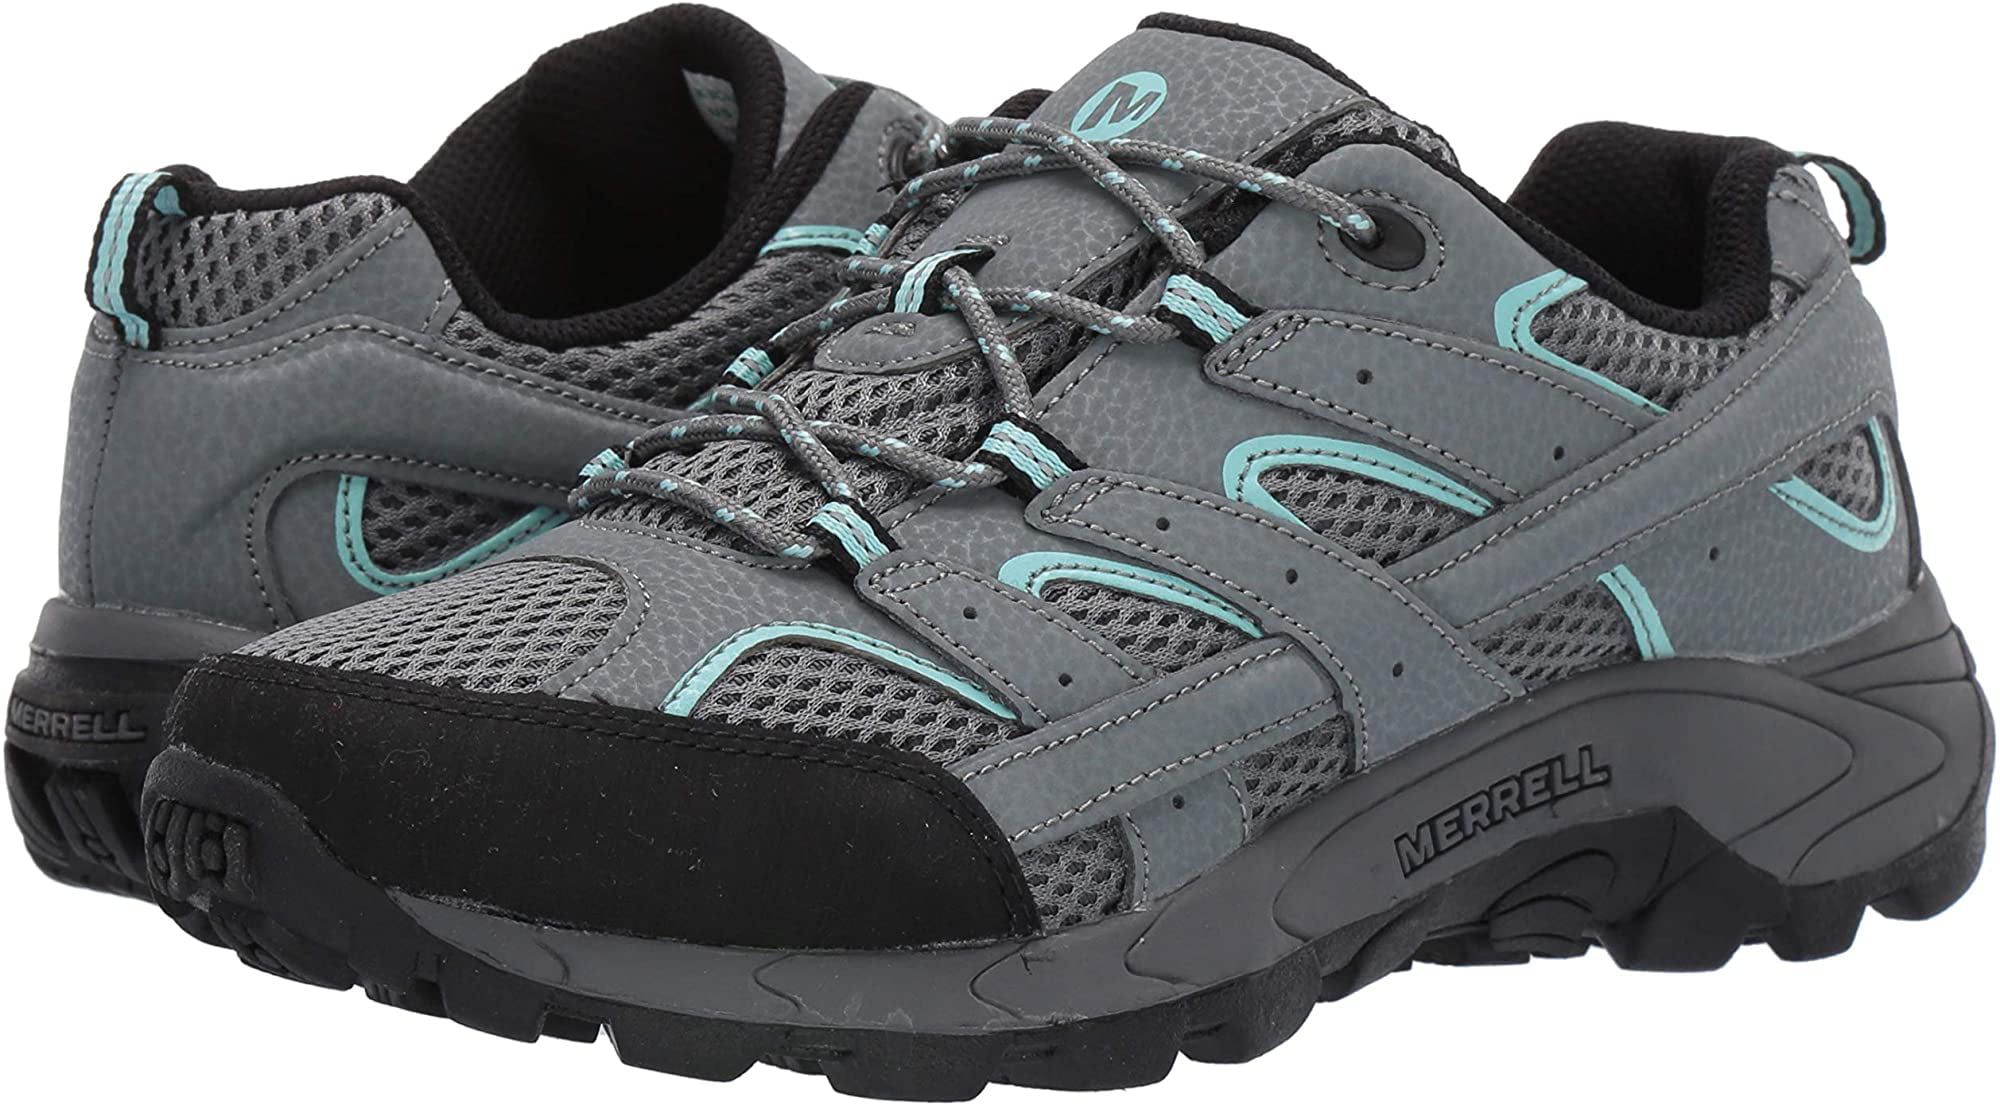 Merrell Girls M-Moab 2 Low Lace Sneakers